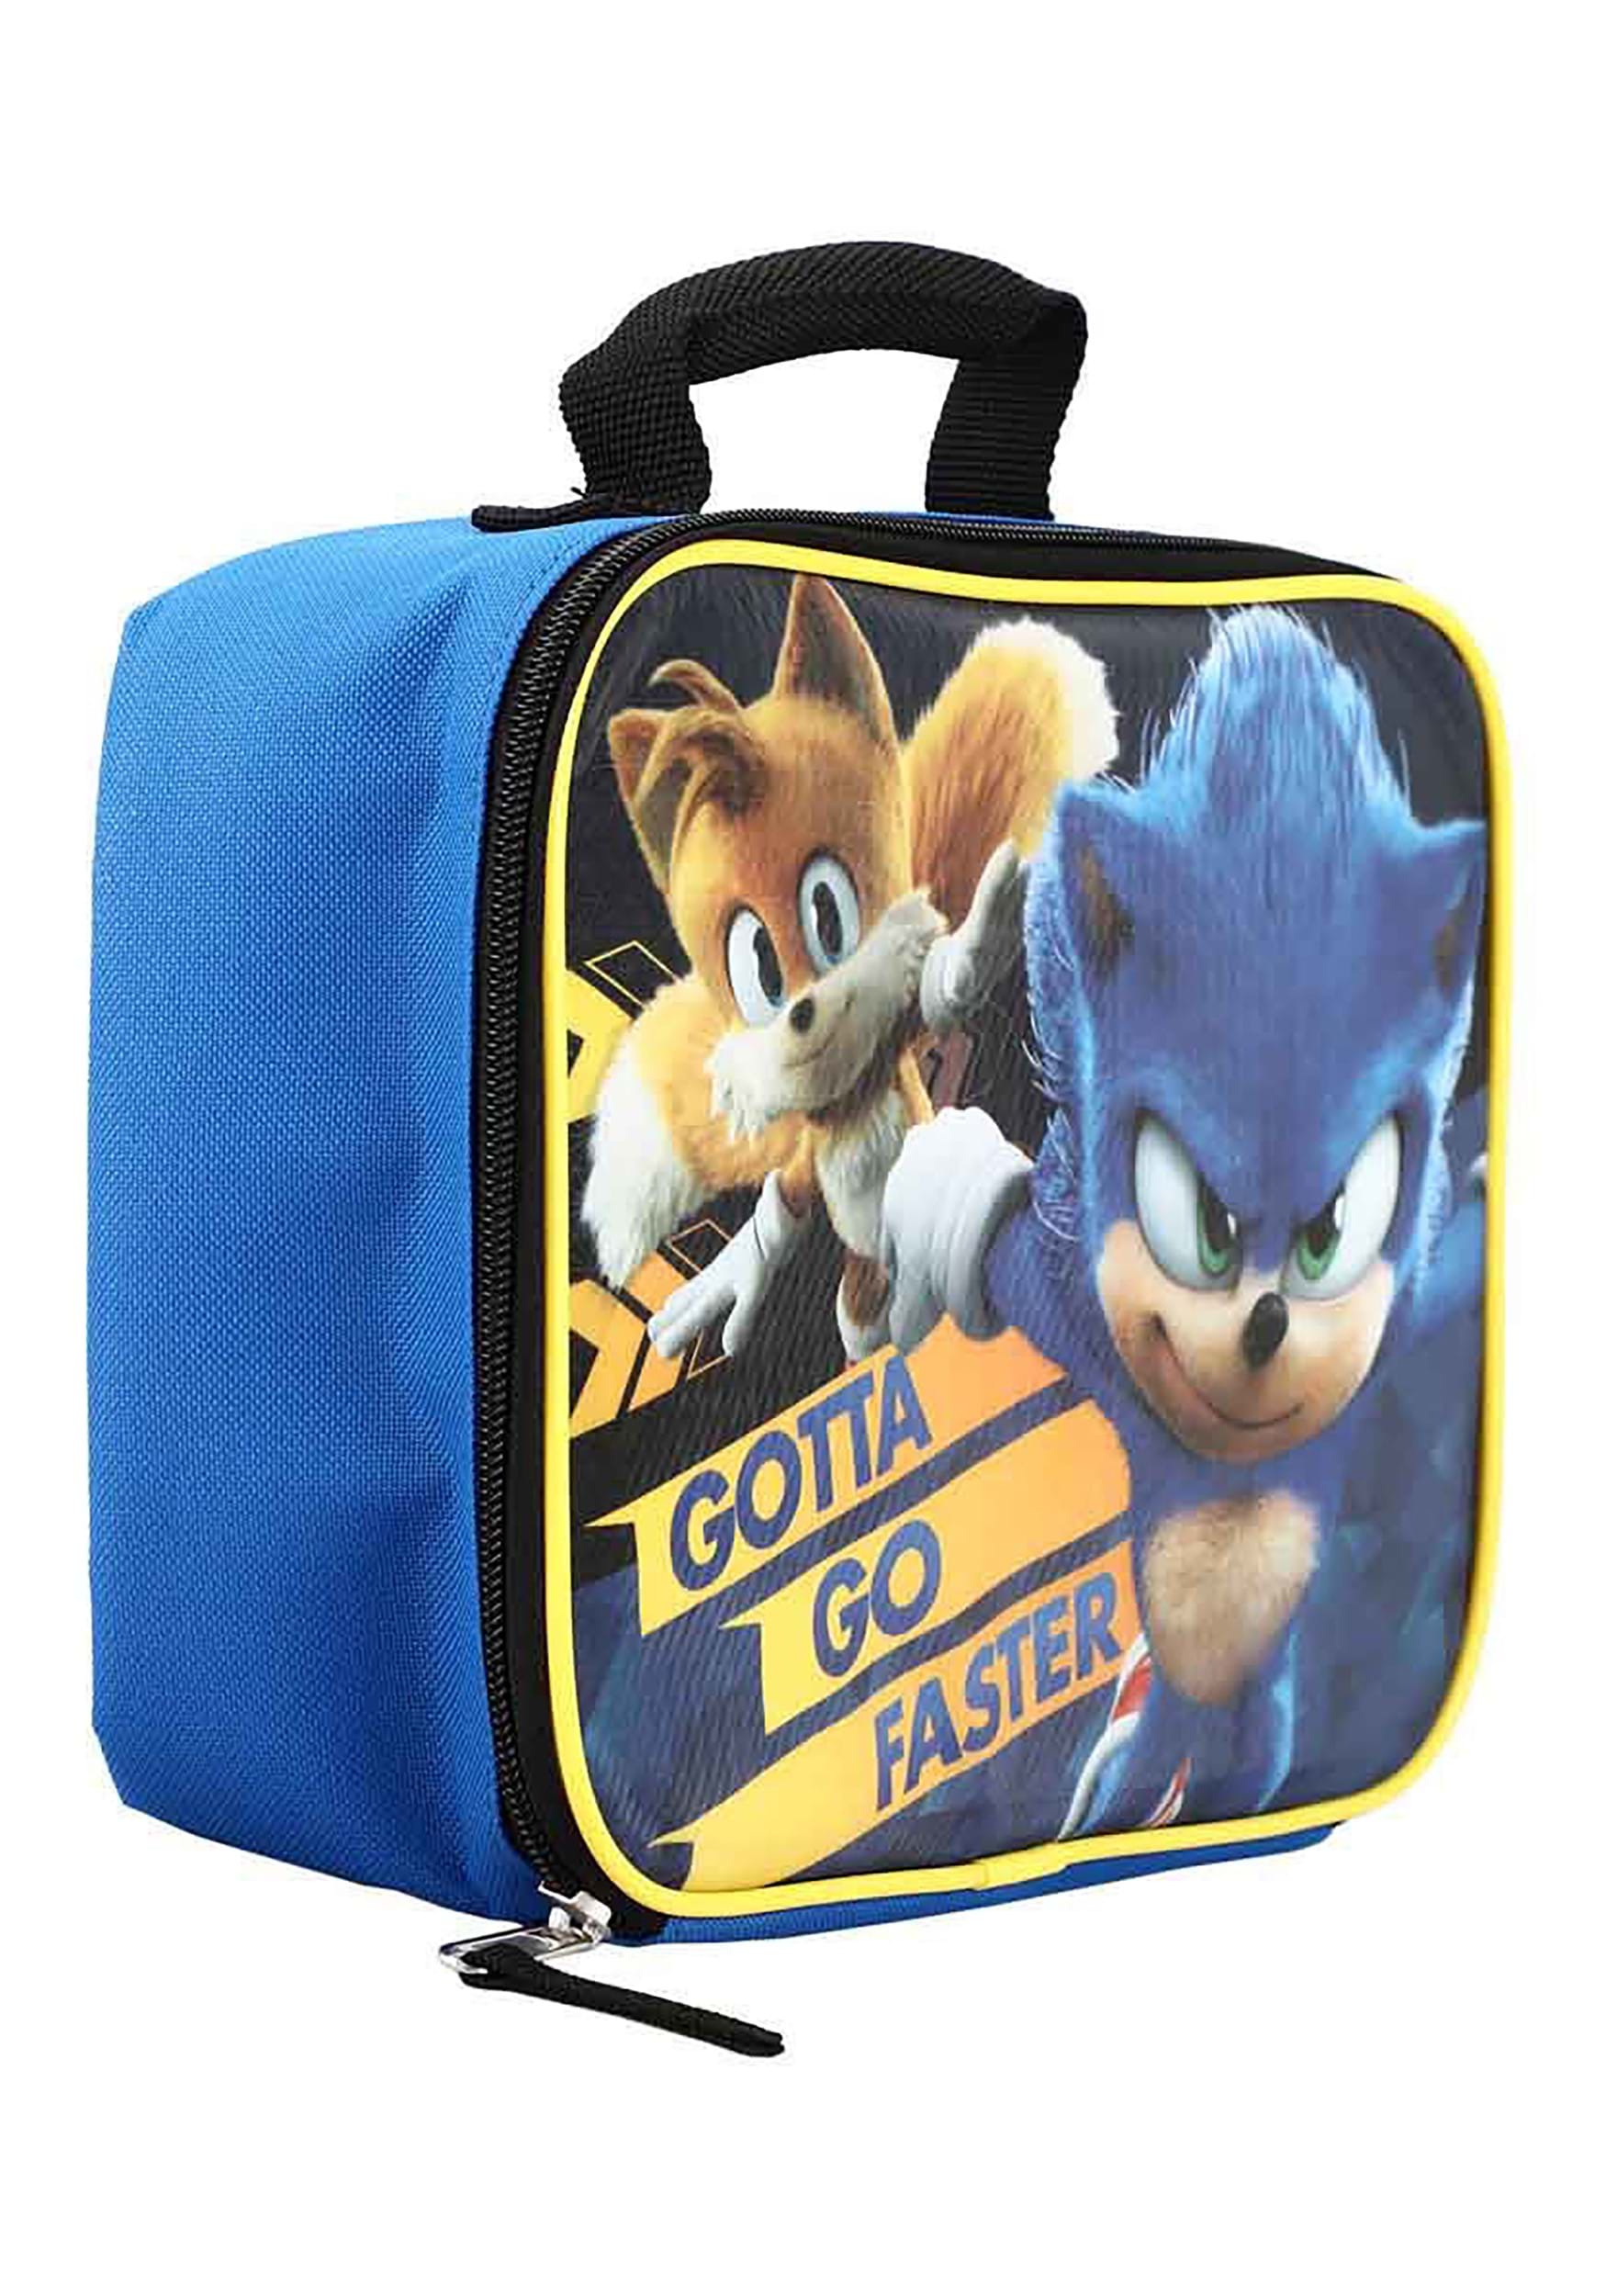 Sonic the Hedgehog Lunch Box Review 